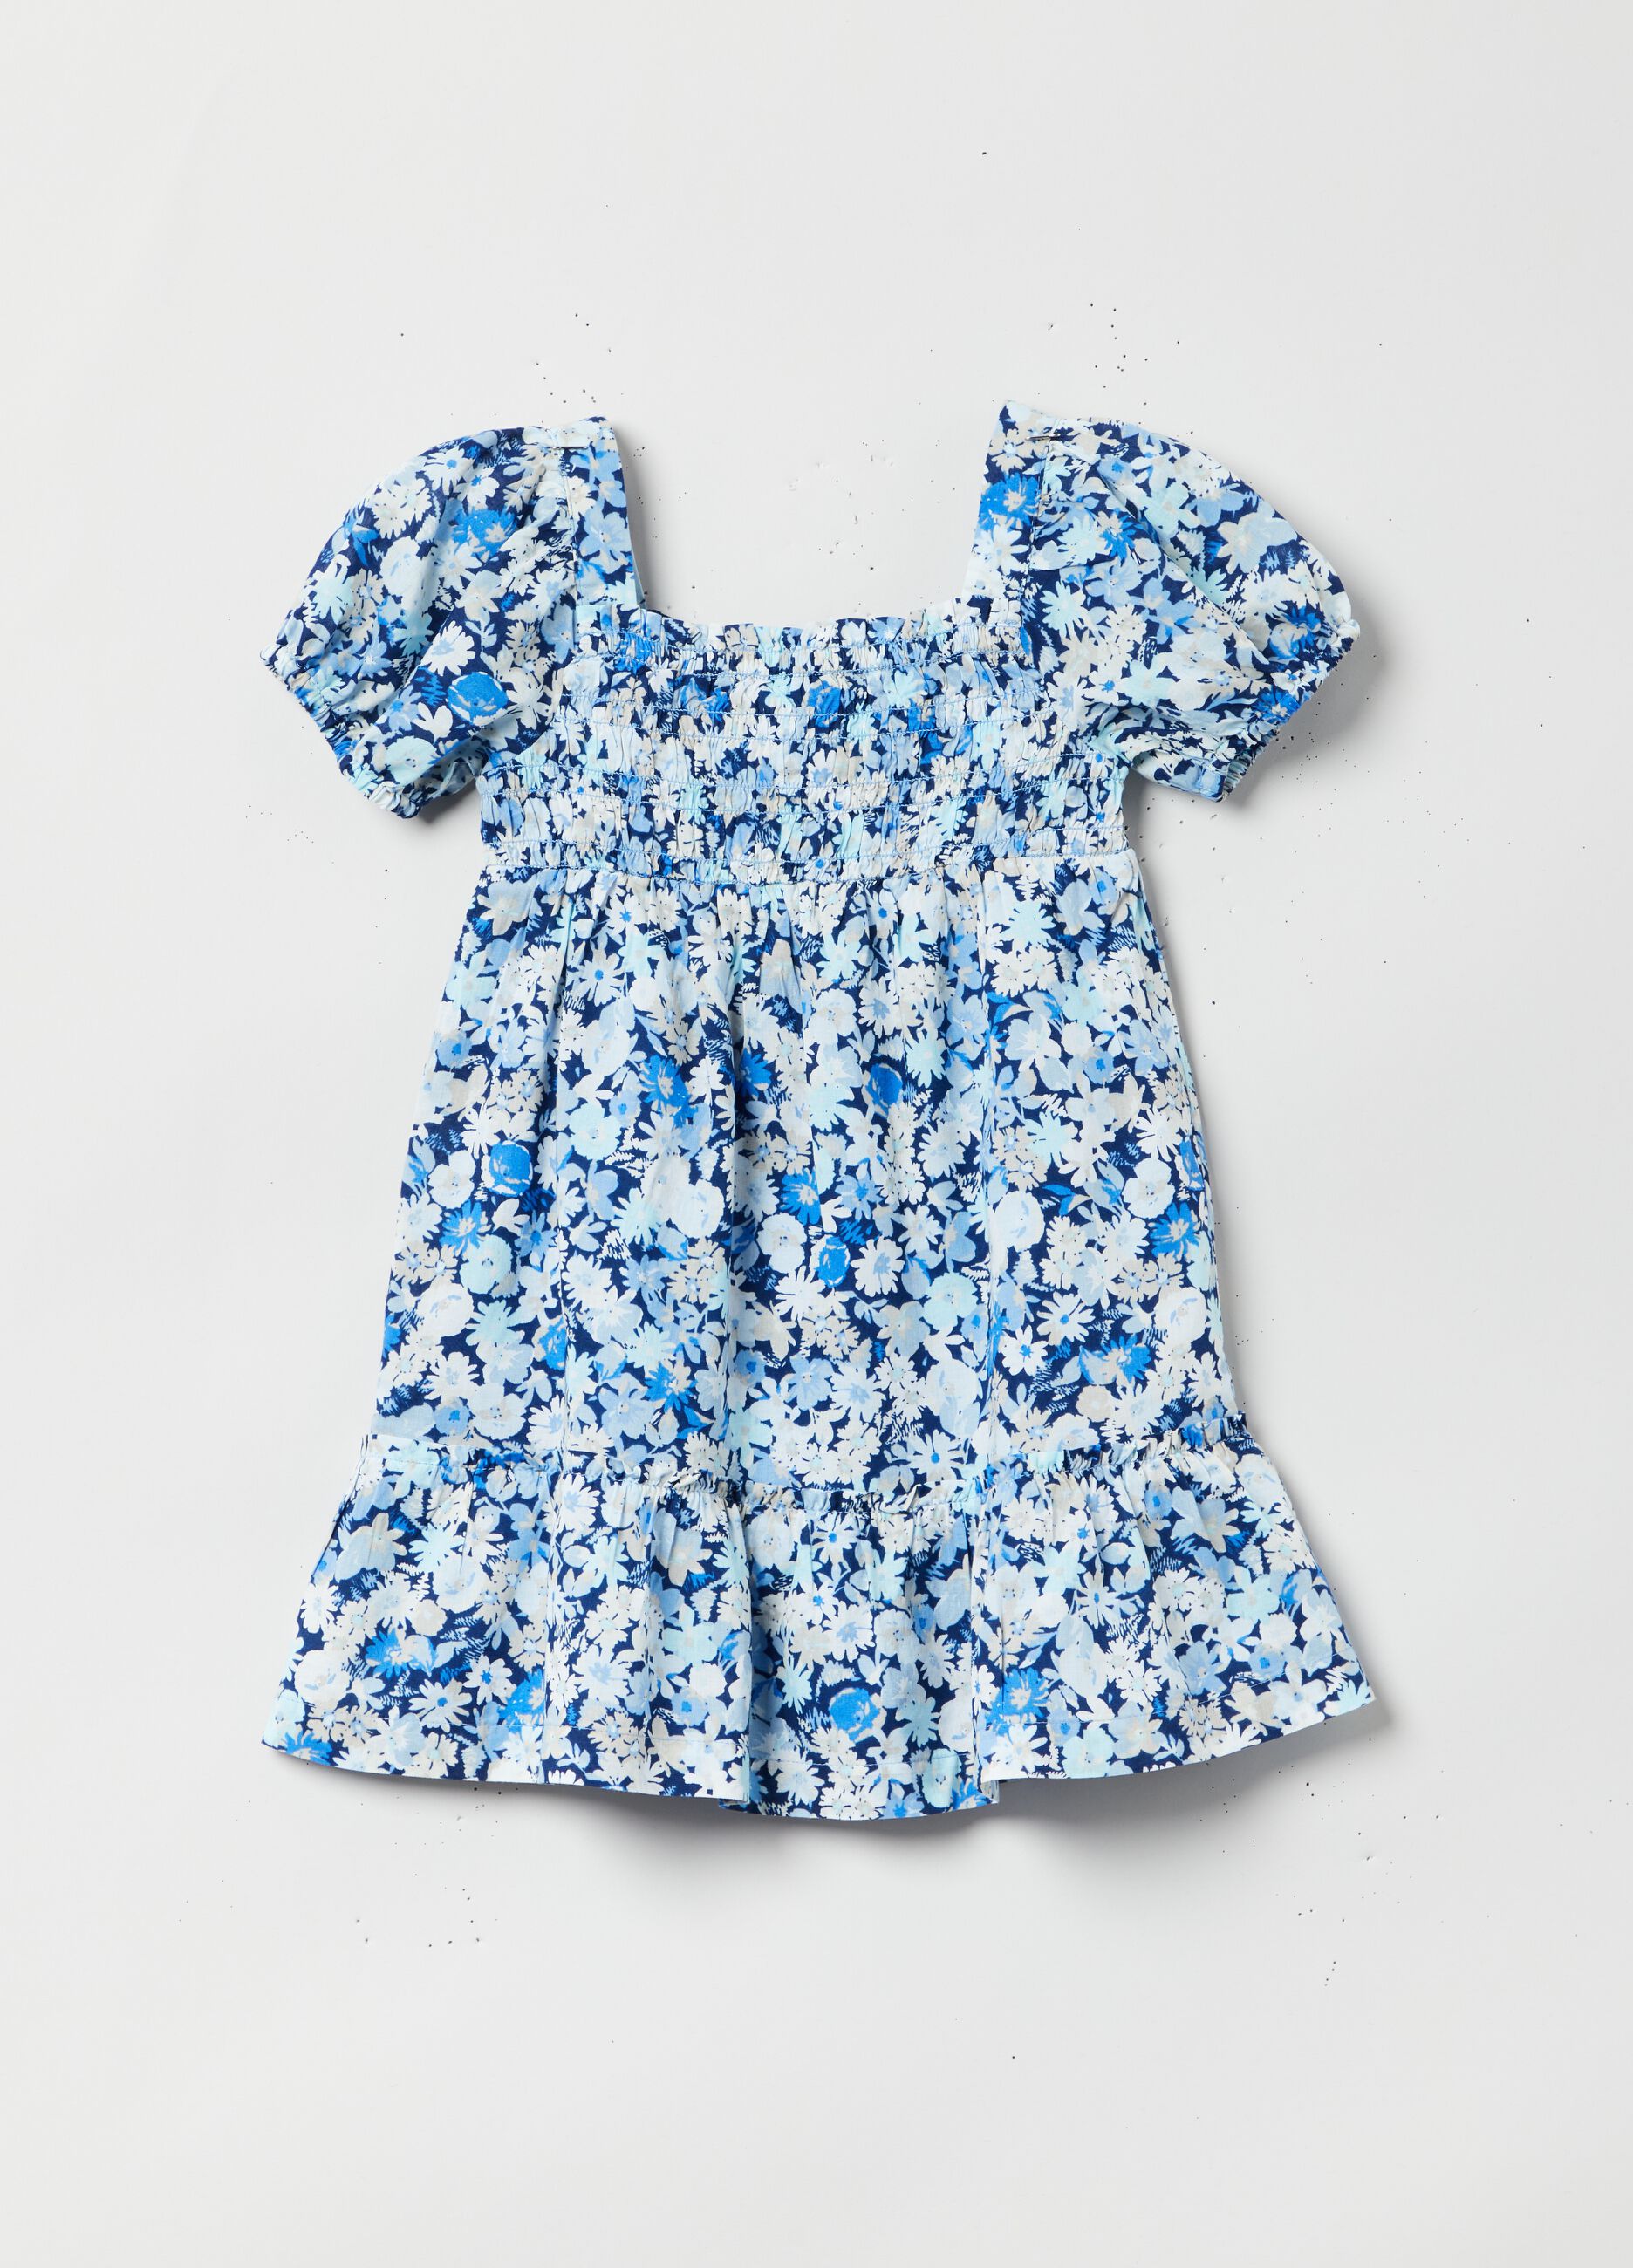 Dress with floral print.